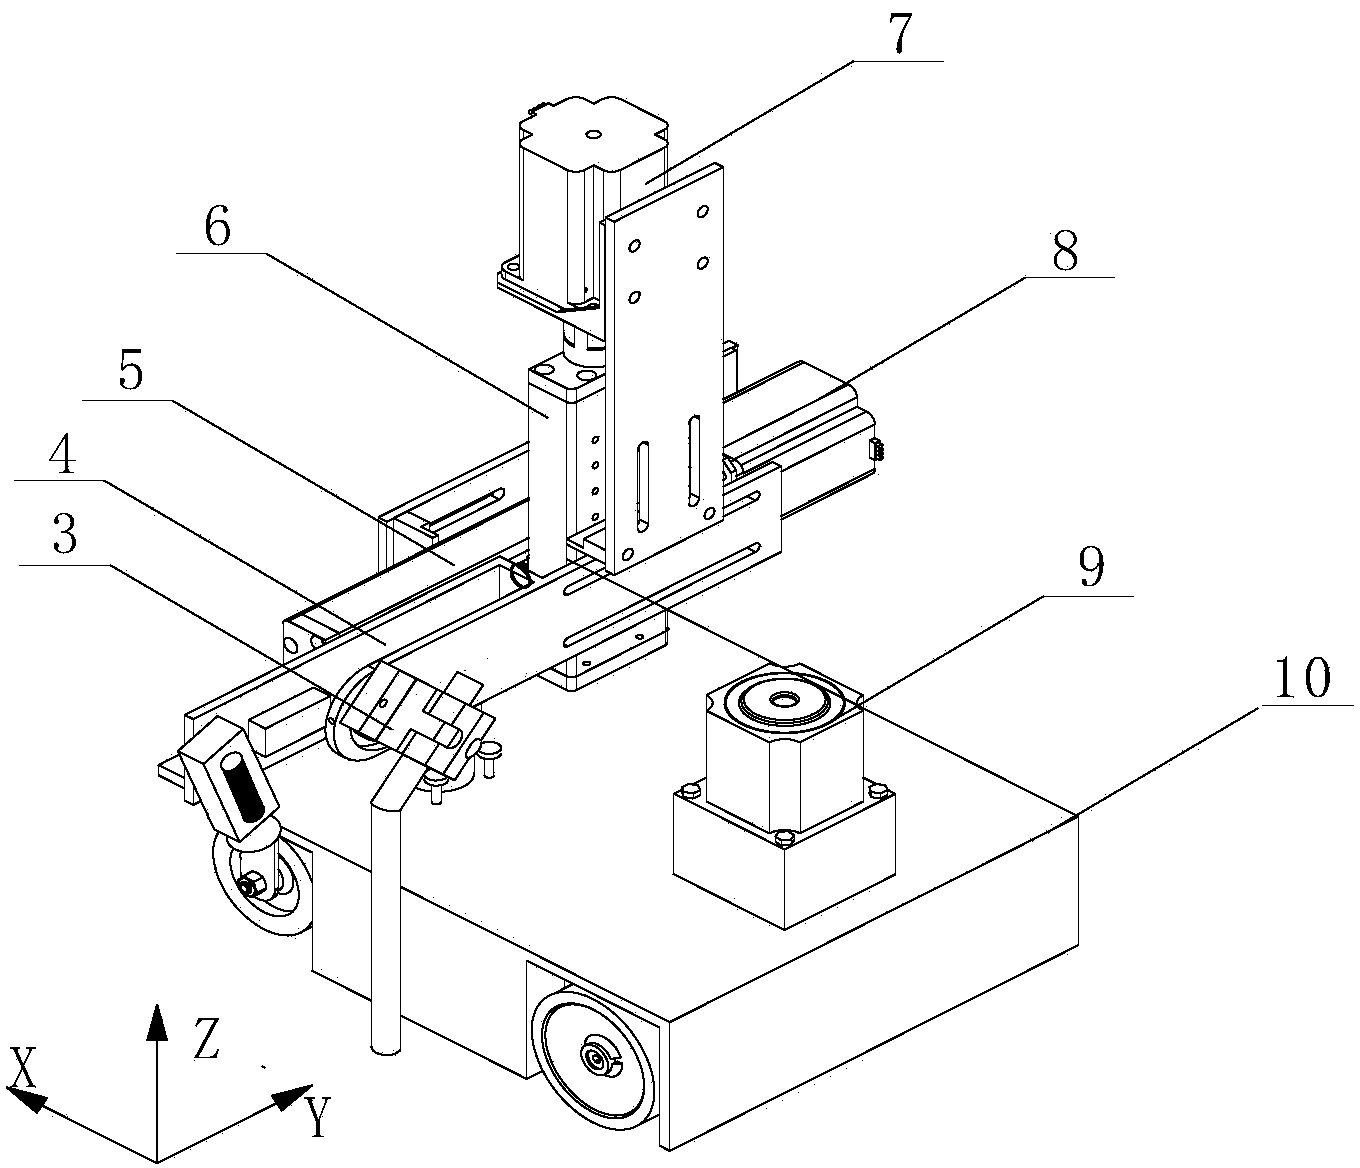 System and method for remotely monitoring automatic welding of mobile robot based on FPGA